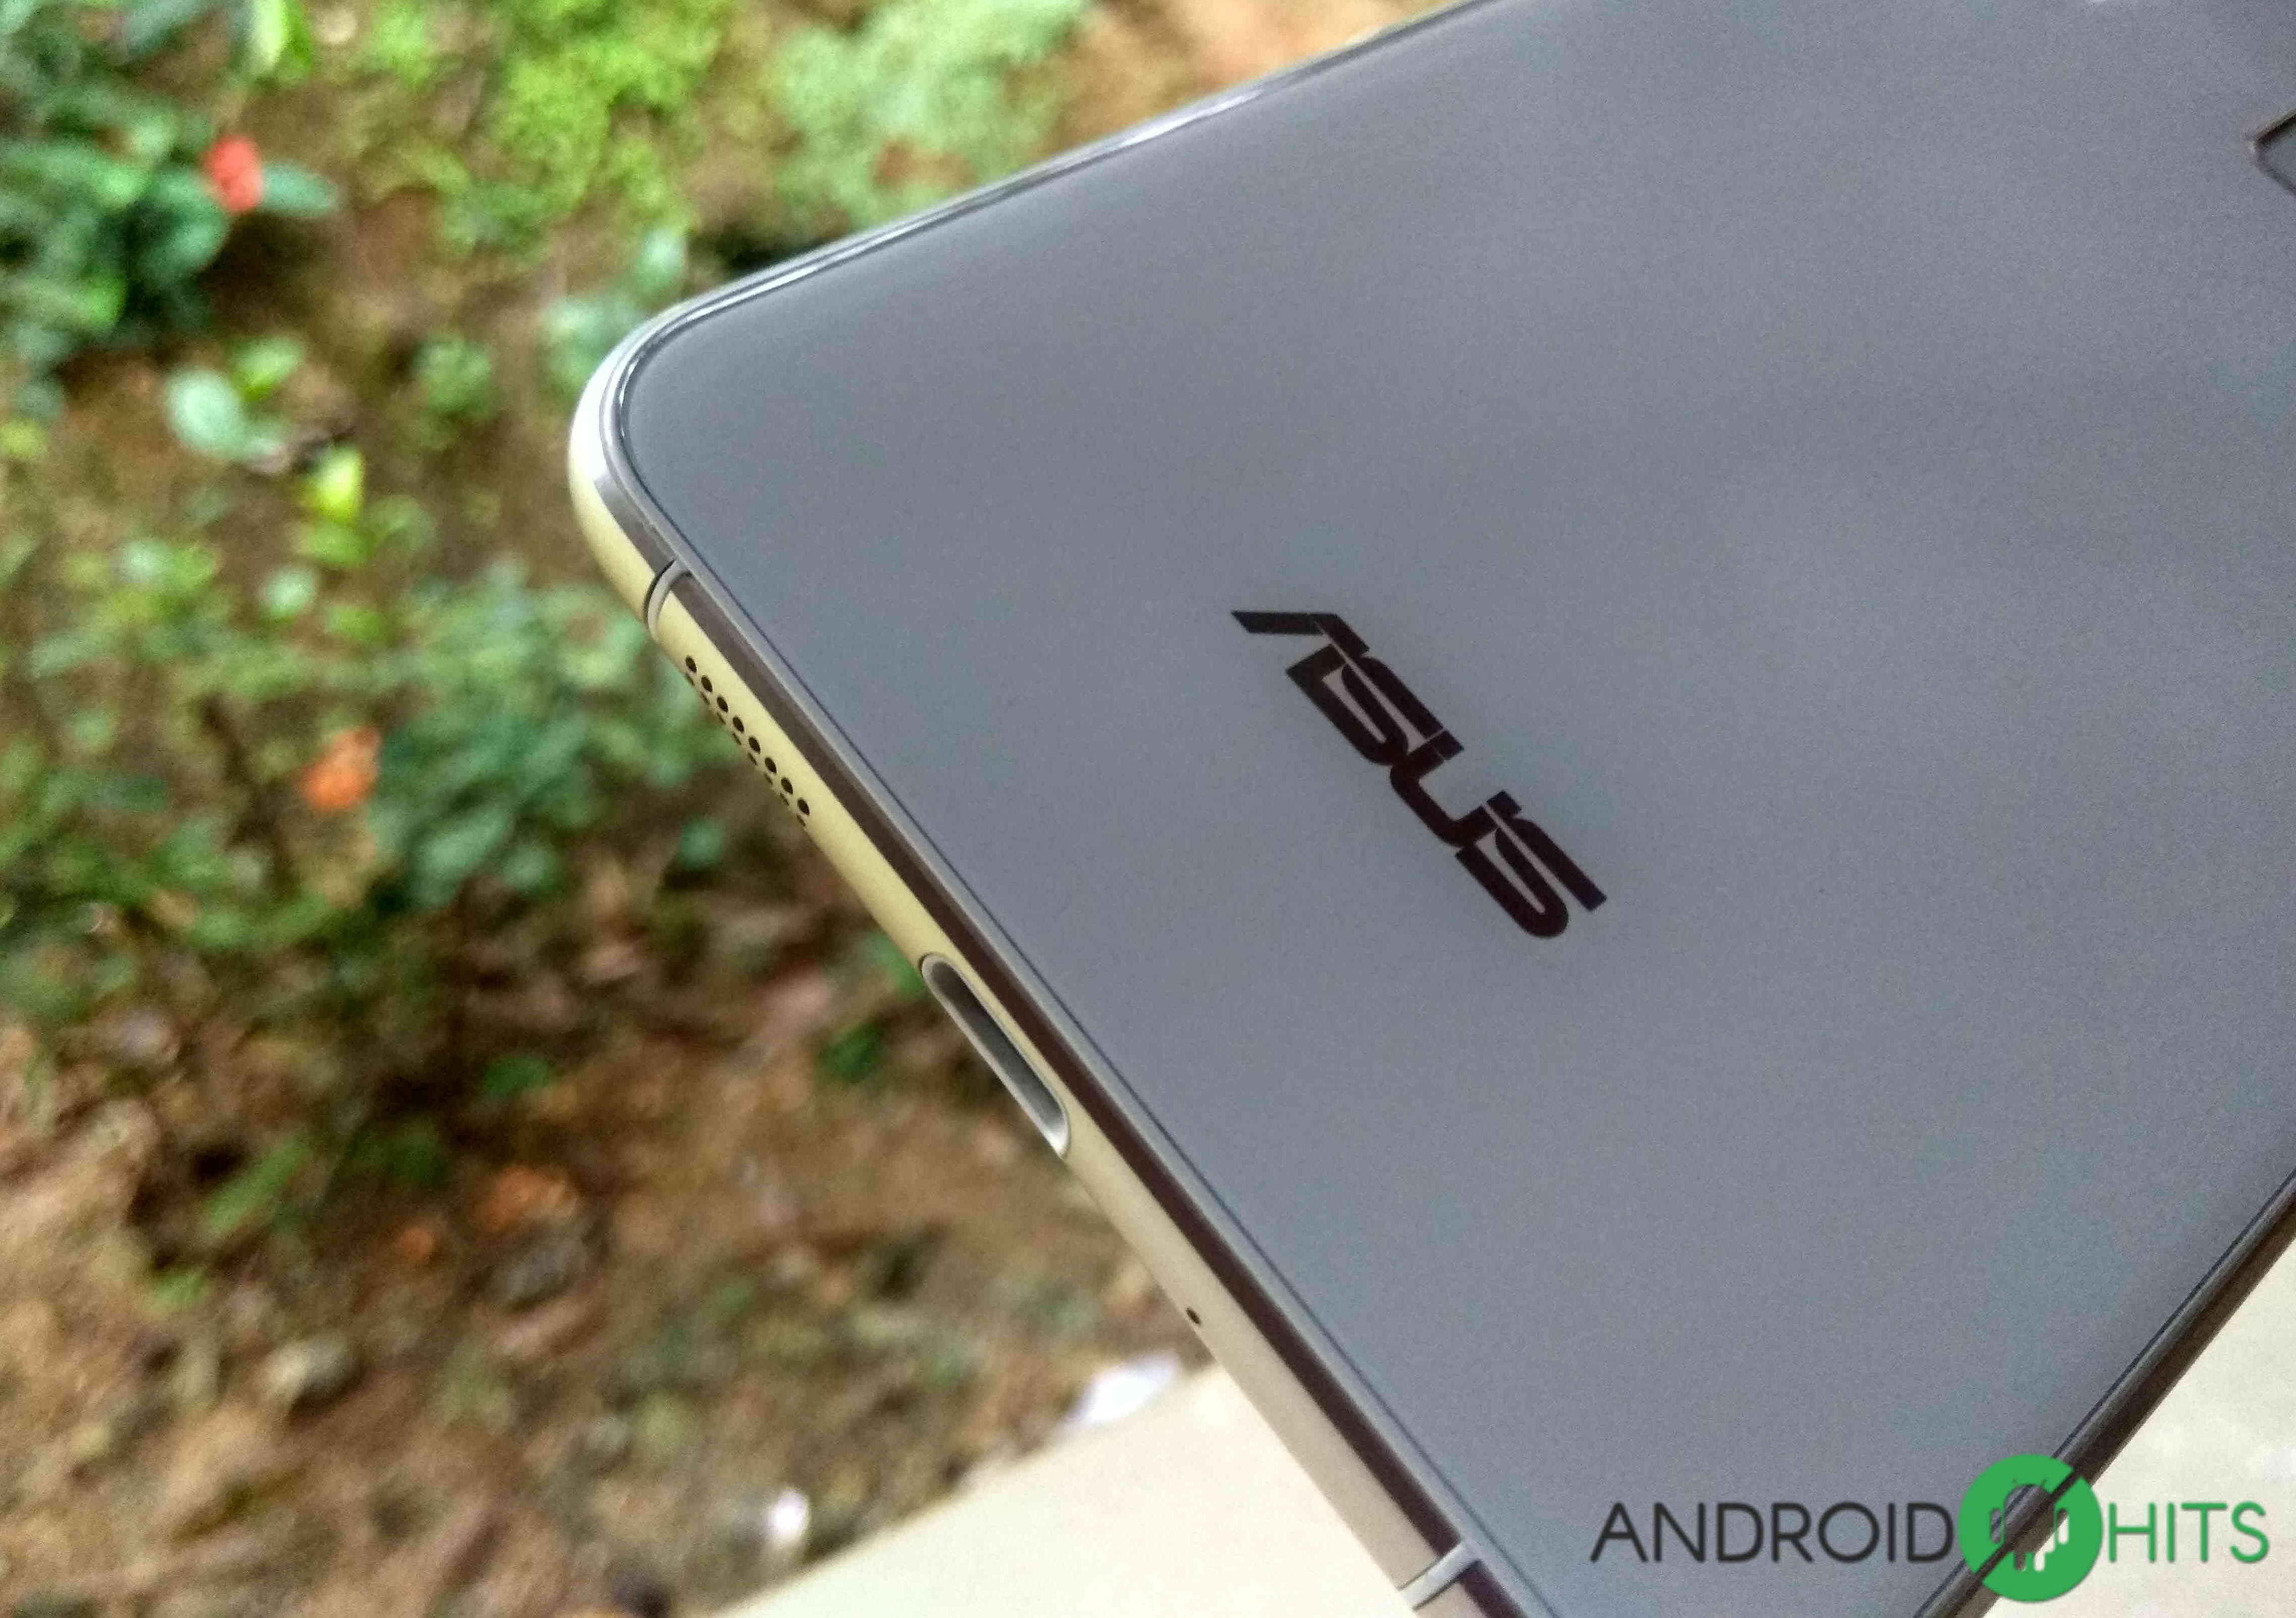 Asus to unveil Zenfone 4 series by July 6